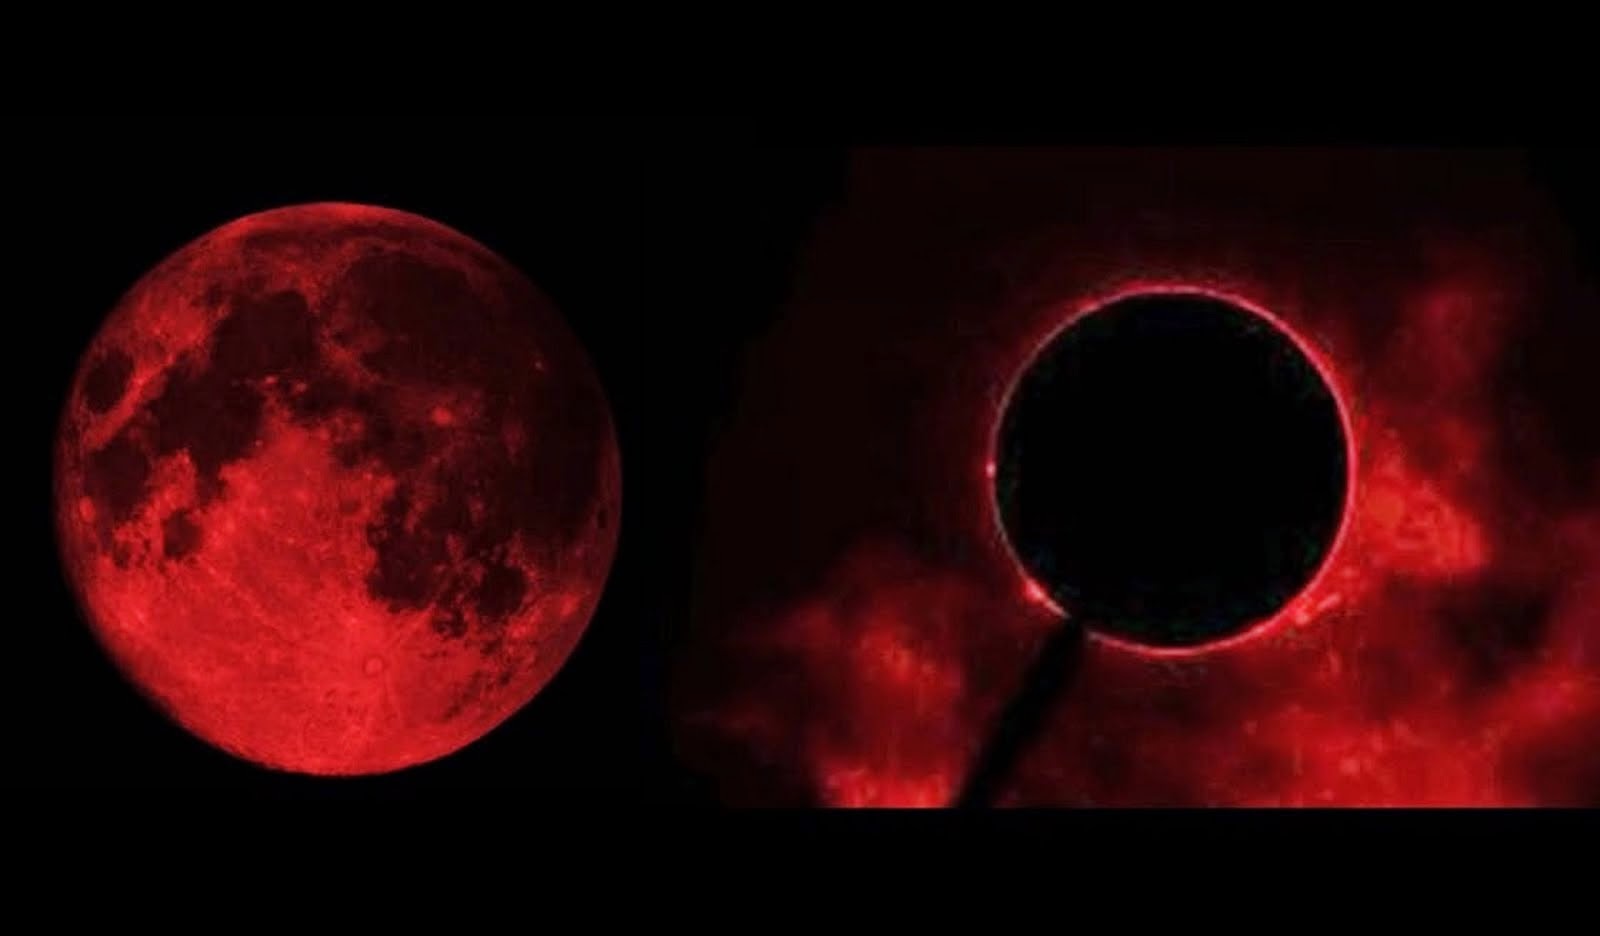 THE BLOOD MOONS ARE APPEARING JUST STARTIED IN 2014